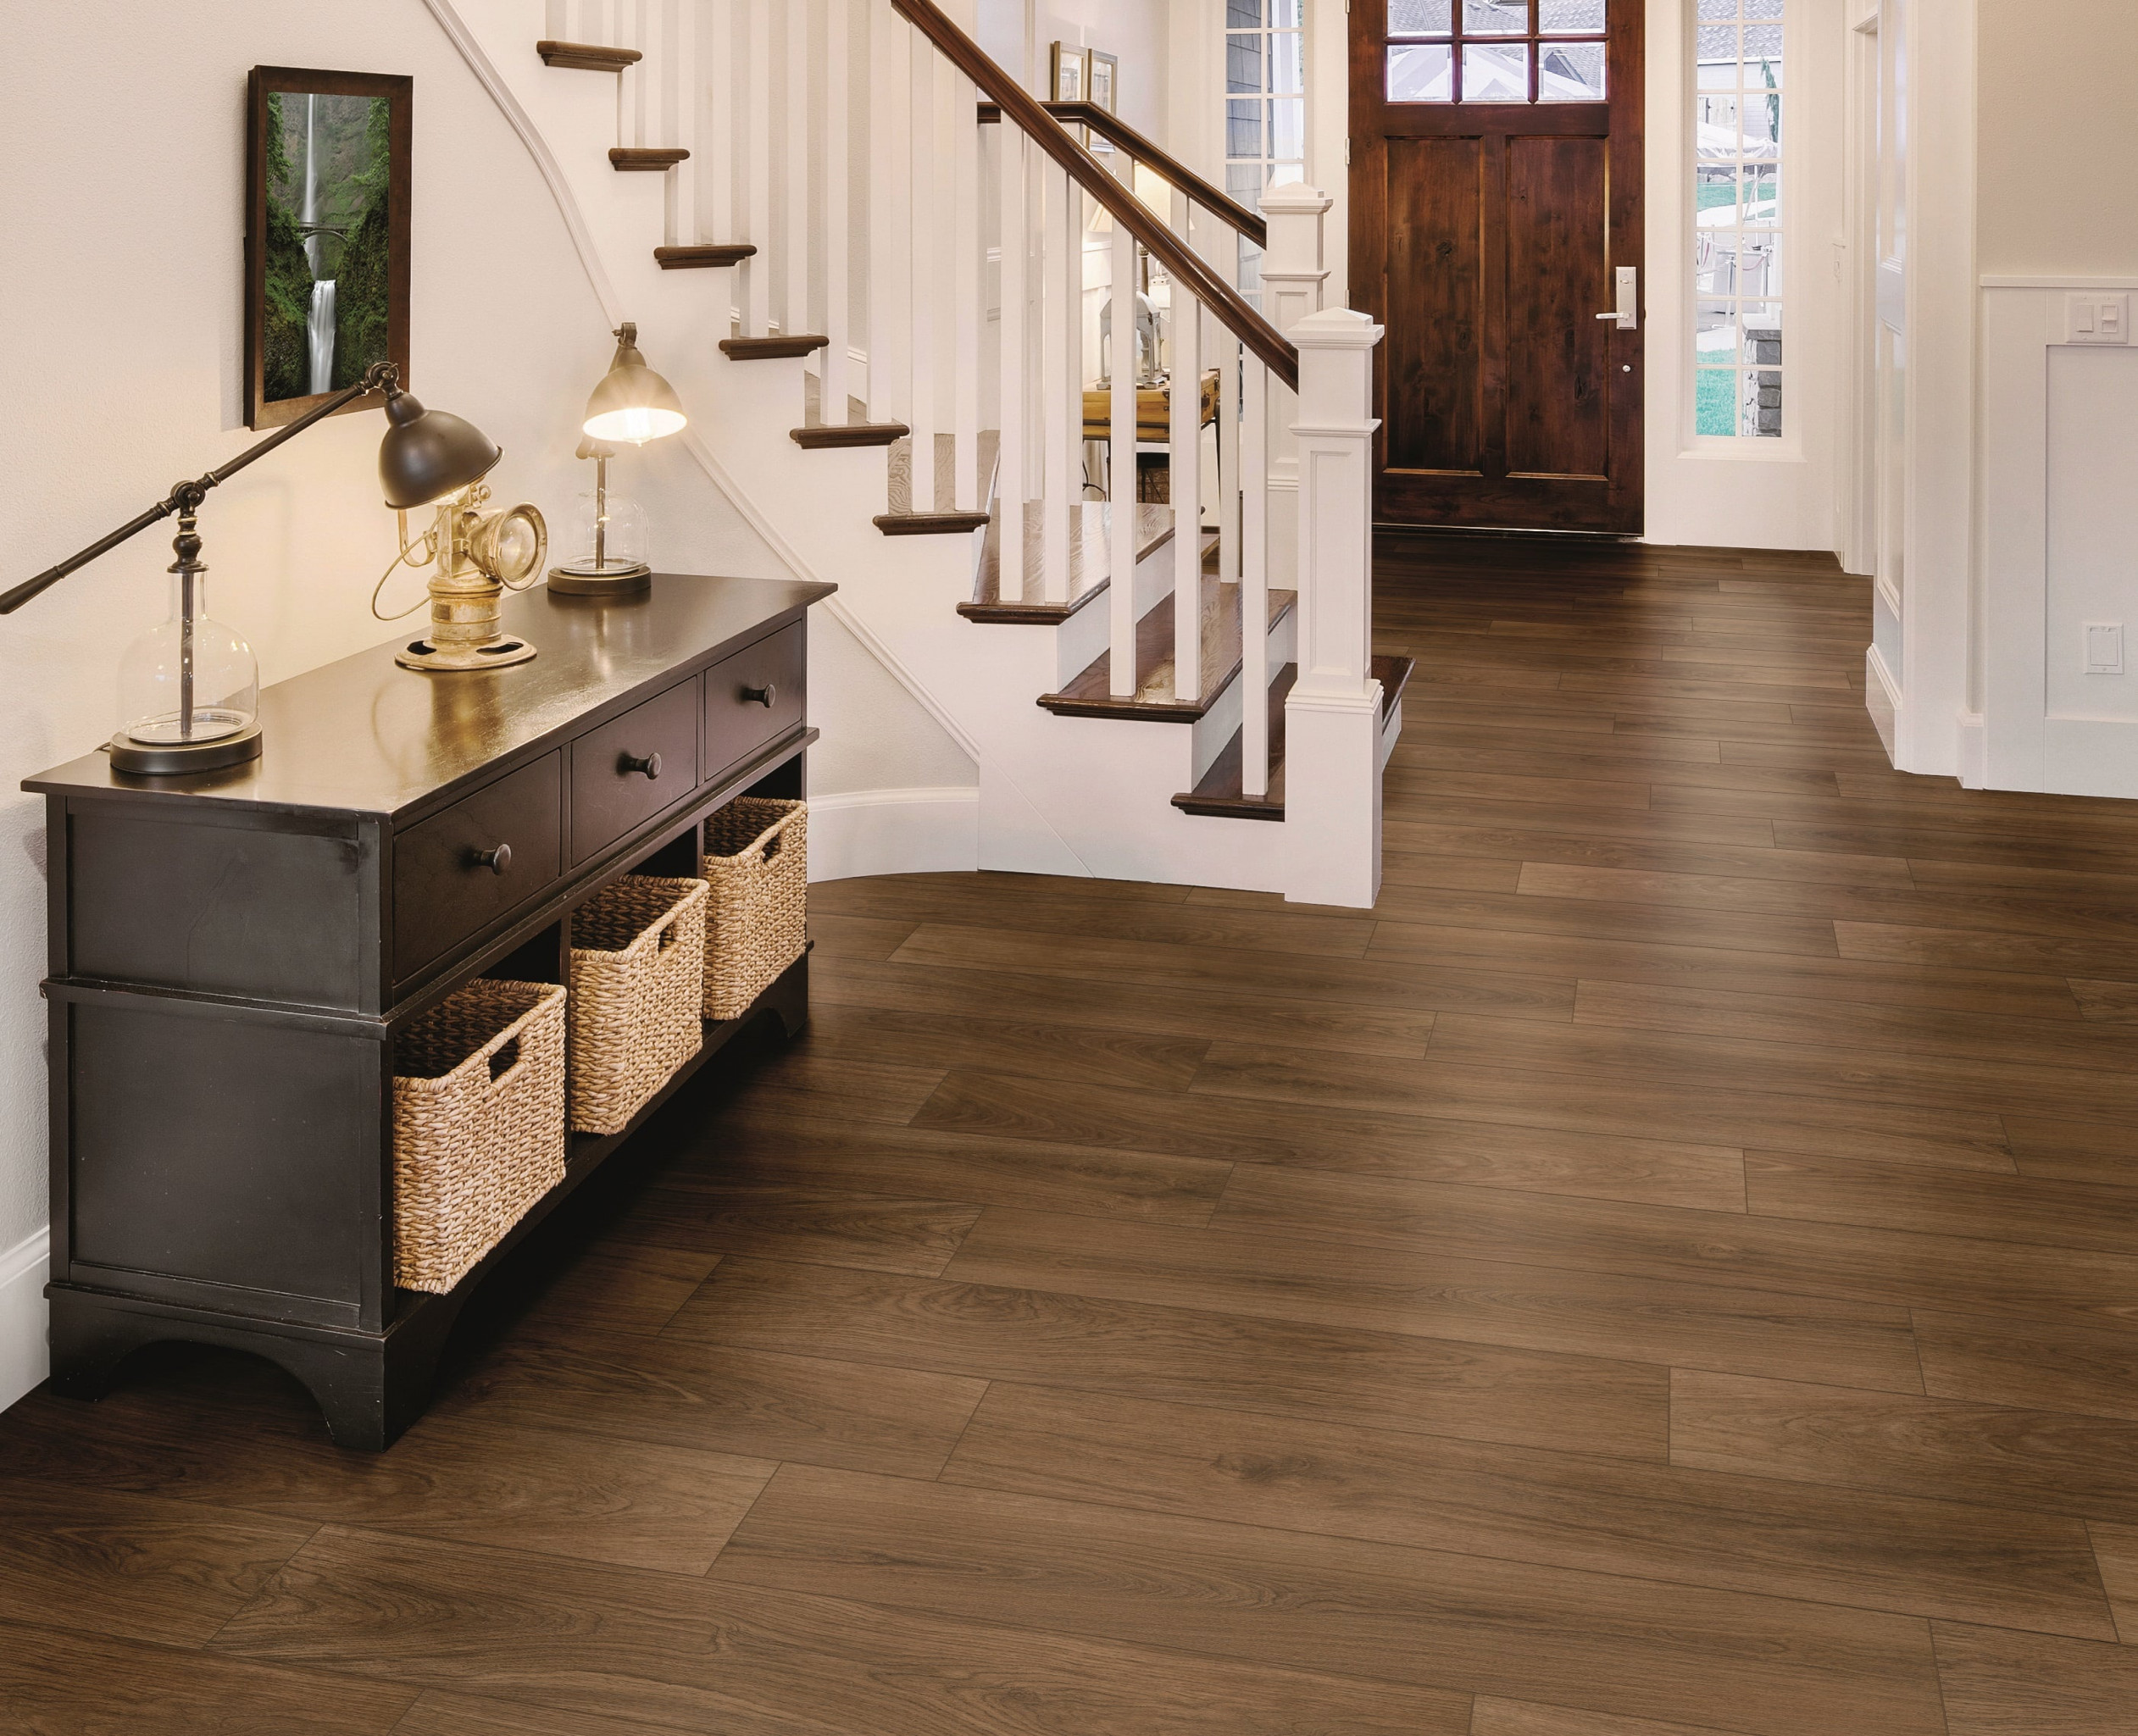 Why are Homeowners Choosing Porcelain Wood Look Tile? - Conestoga Tile